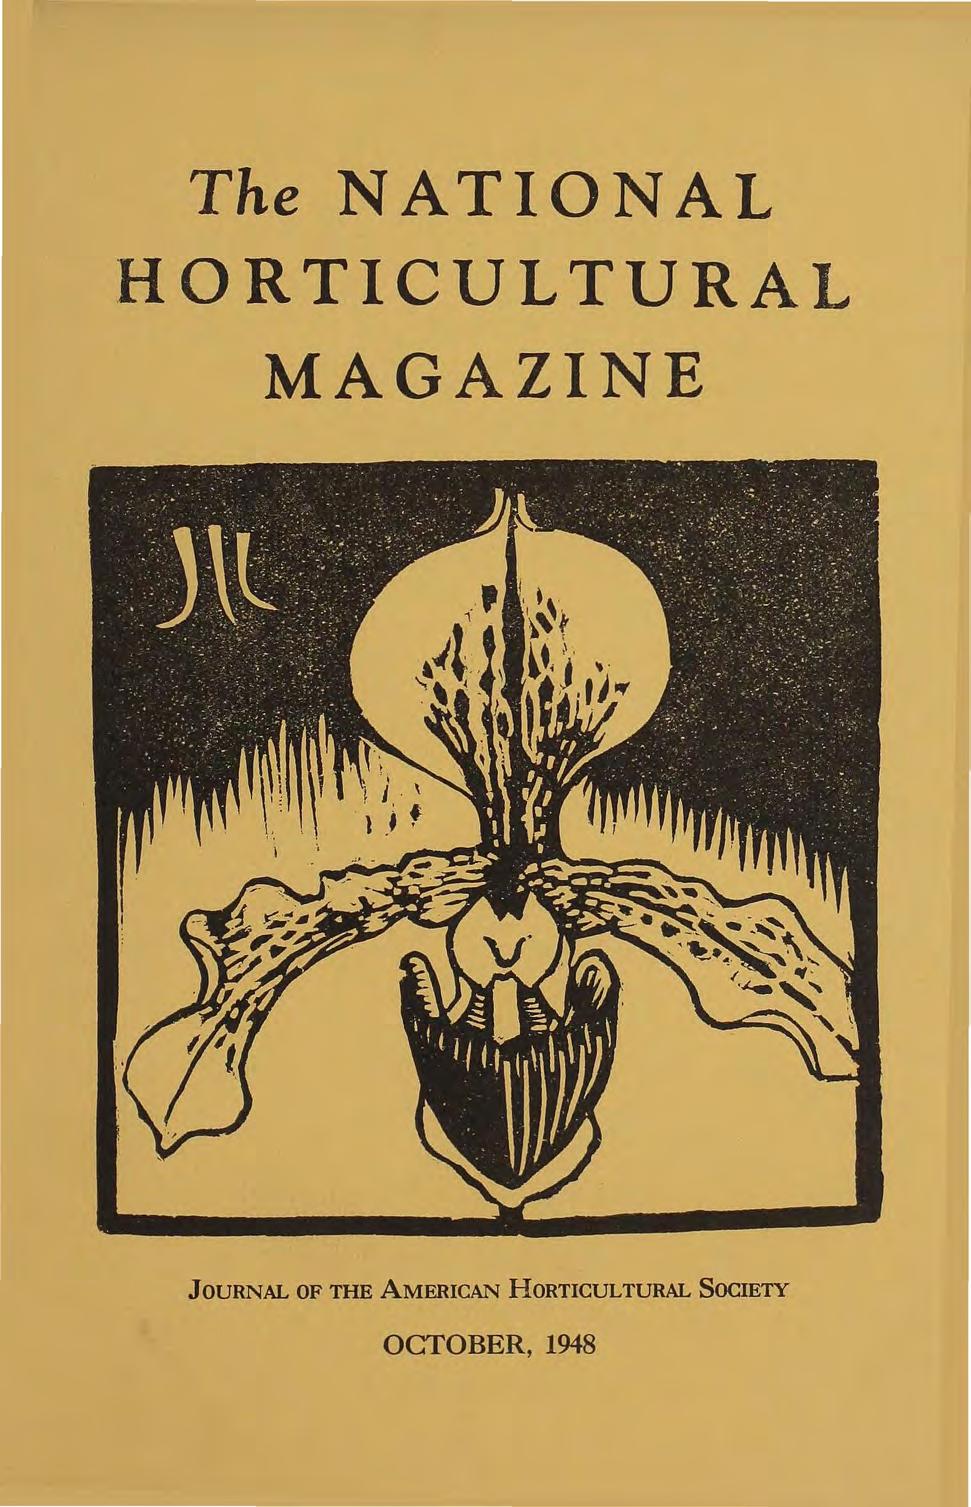 The NATIONAL HORTICULTURAL MAGAZINE JOURNAL OF